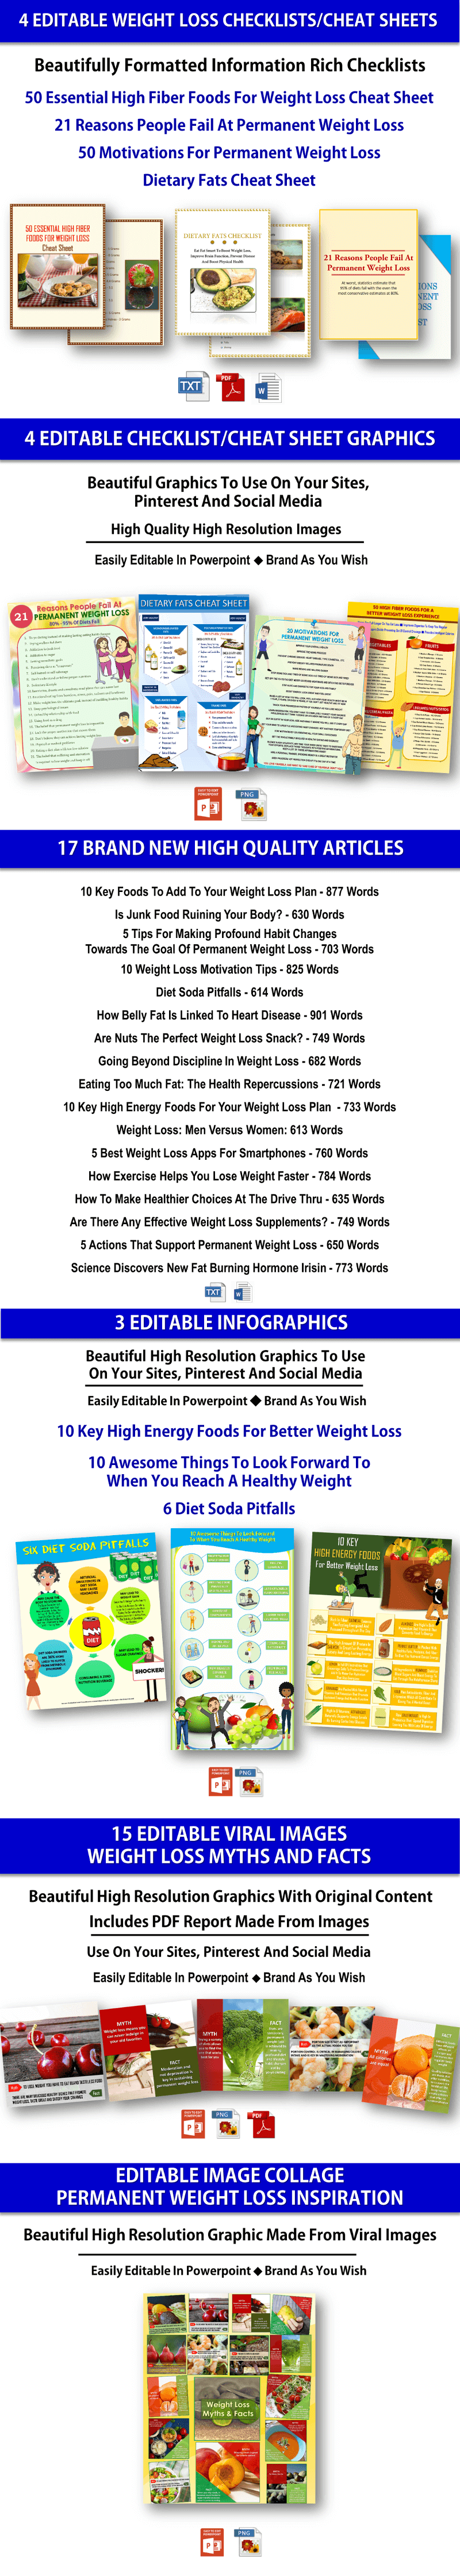 Giant Permanent Weight Loss PLR: eBooks, Videos, Infographics, Articles